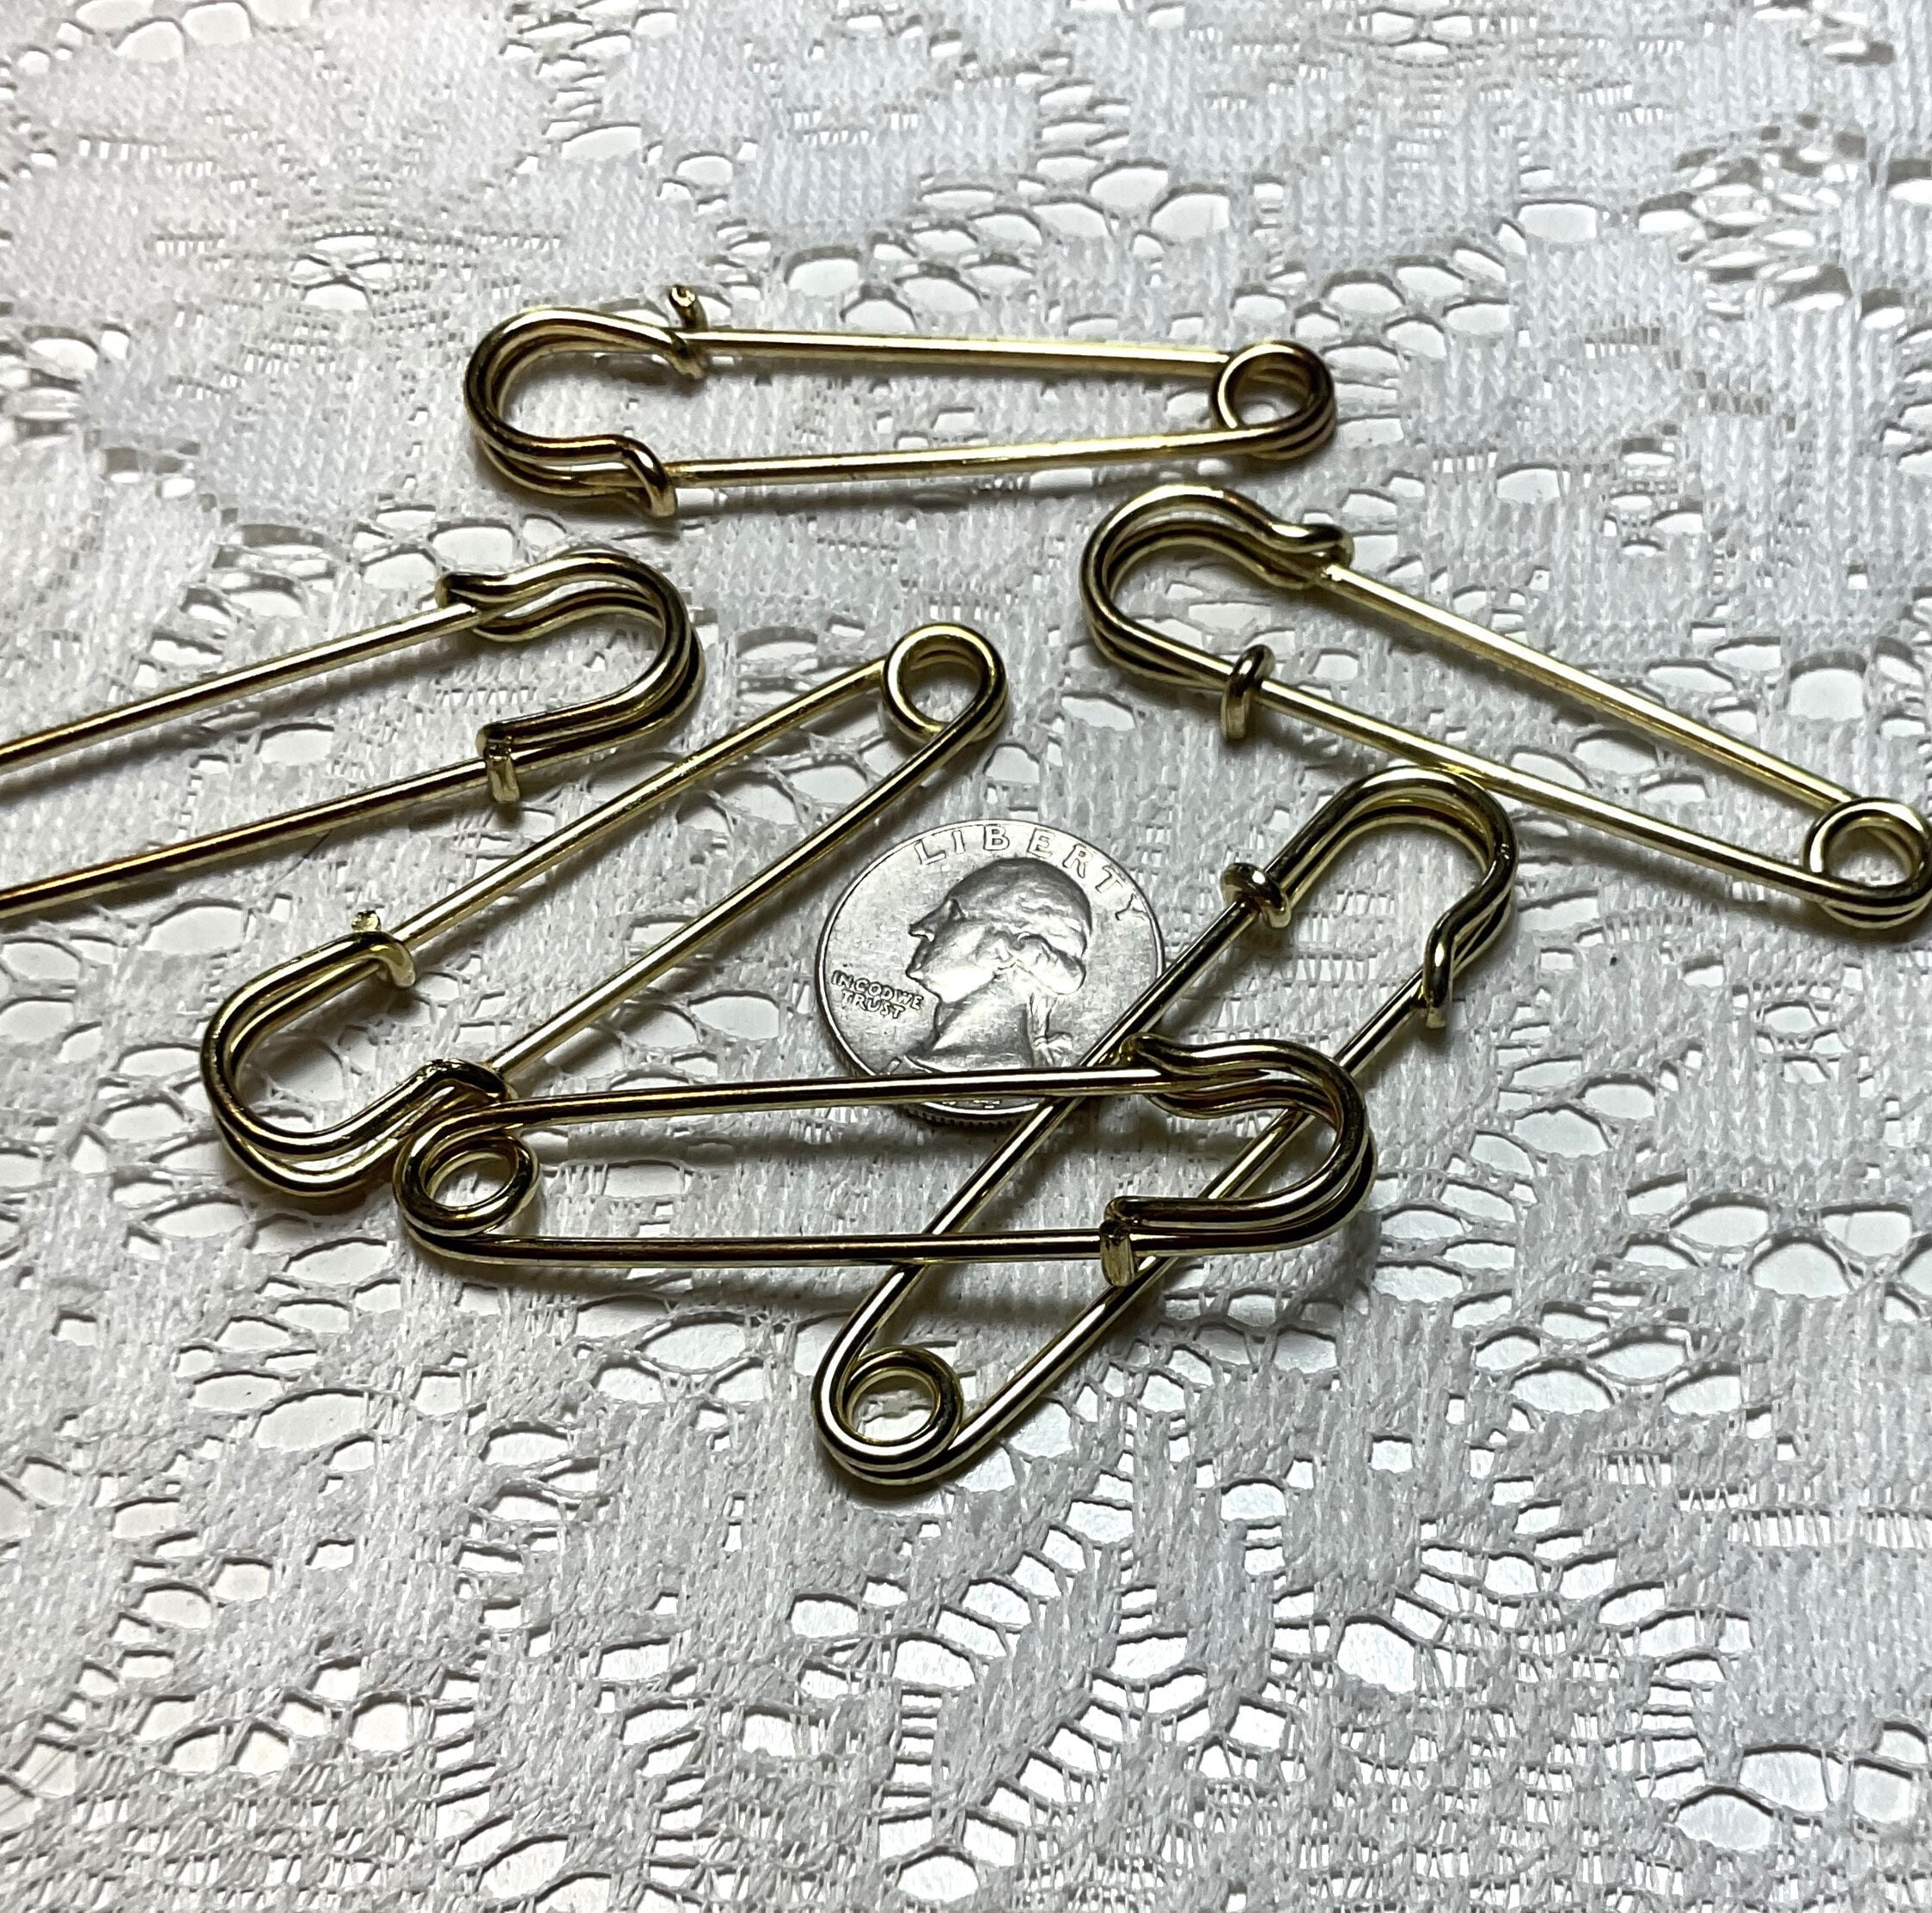 New Design Kilt Safety Pins Rose Gold 26mm Sewing Clothing 